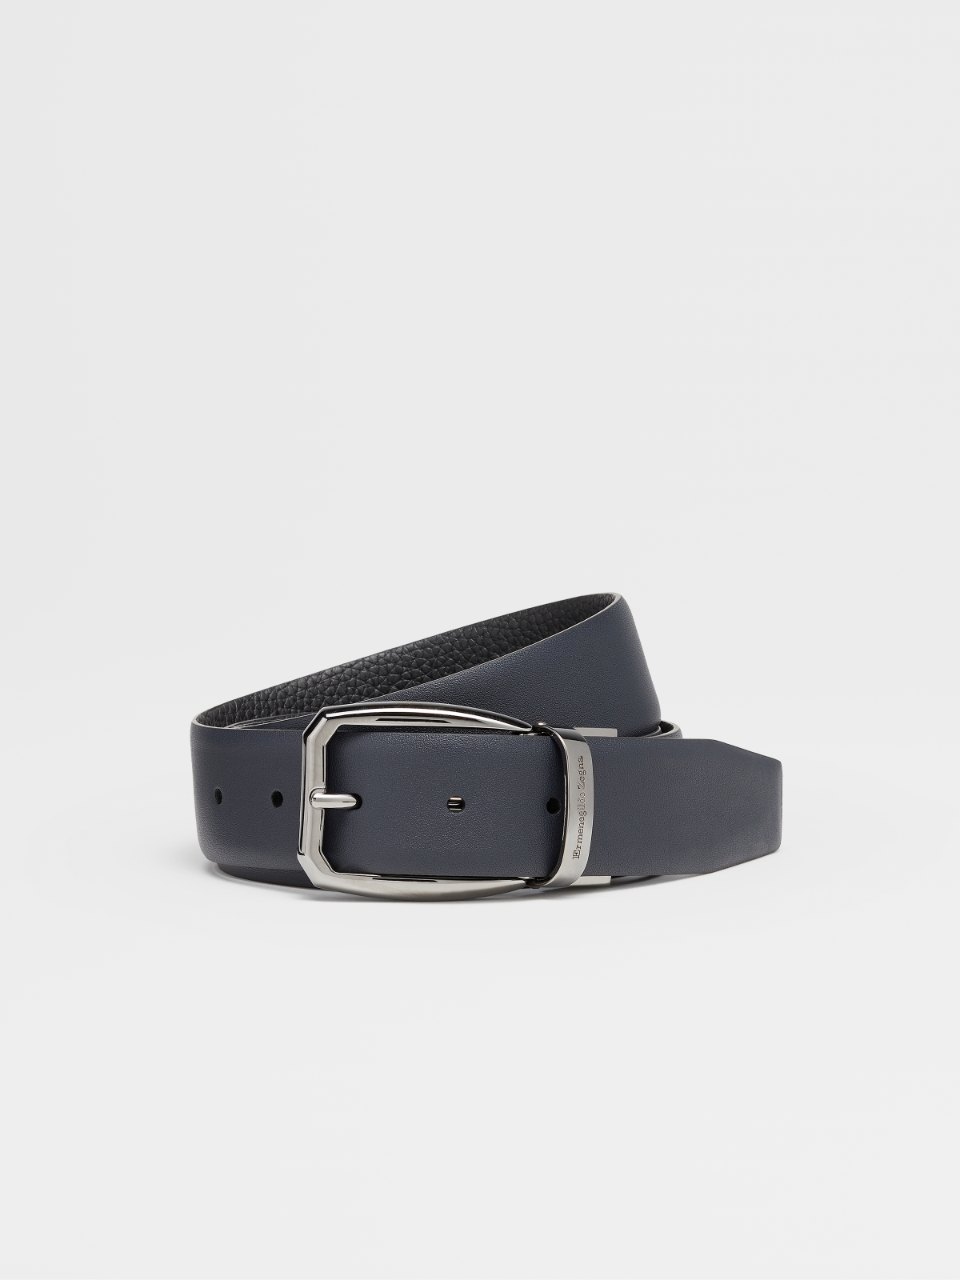 Dark Blue Smooth Leather and Black Grained Leather Reversible Belt